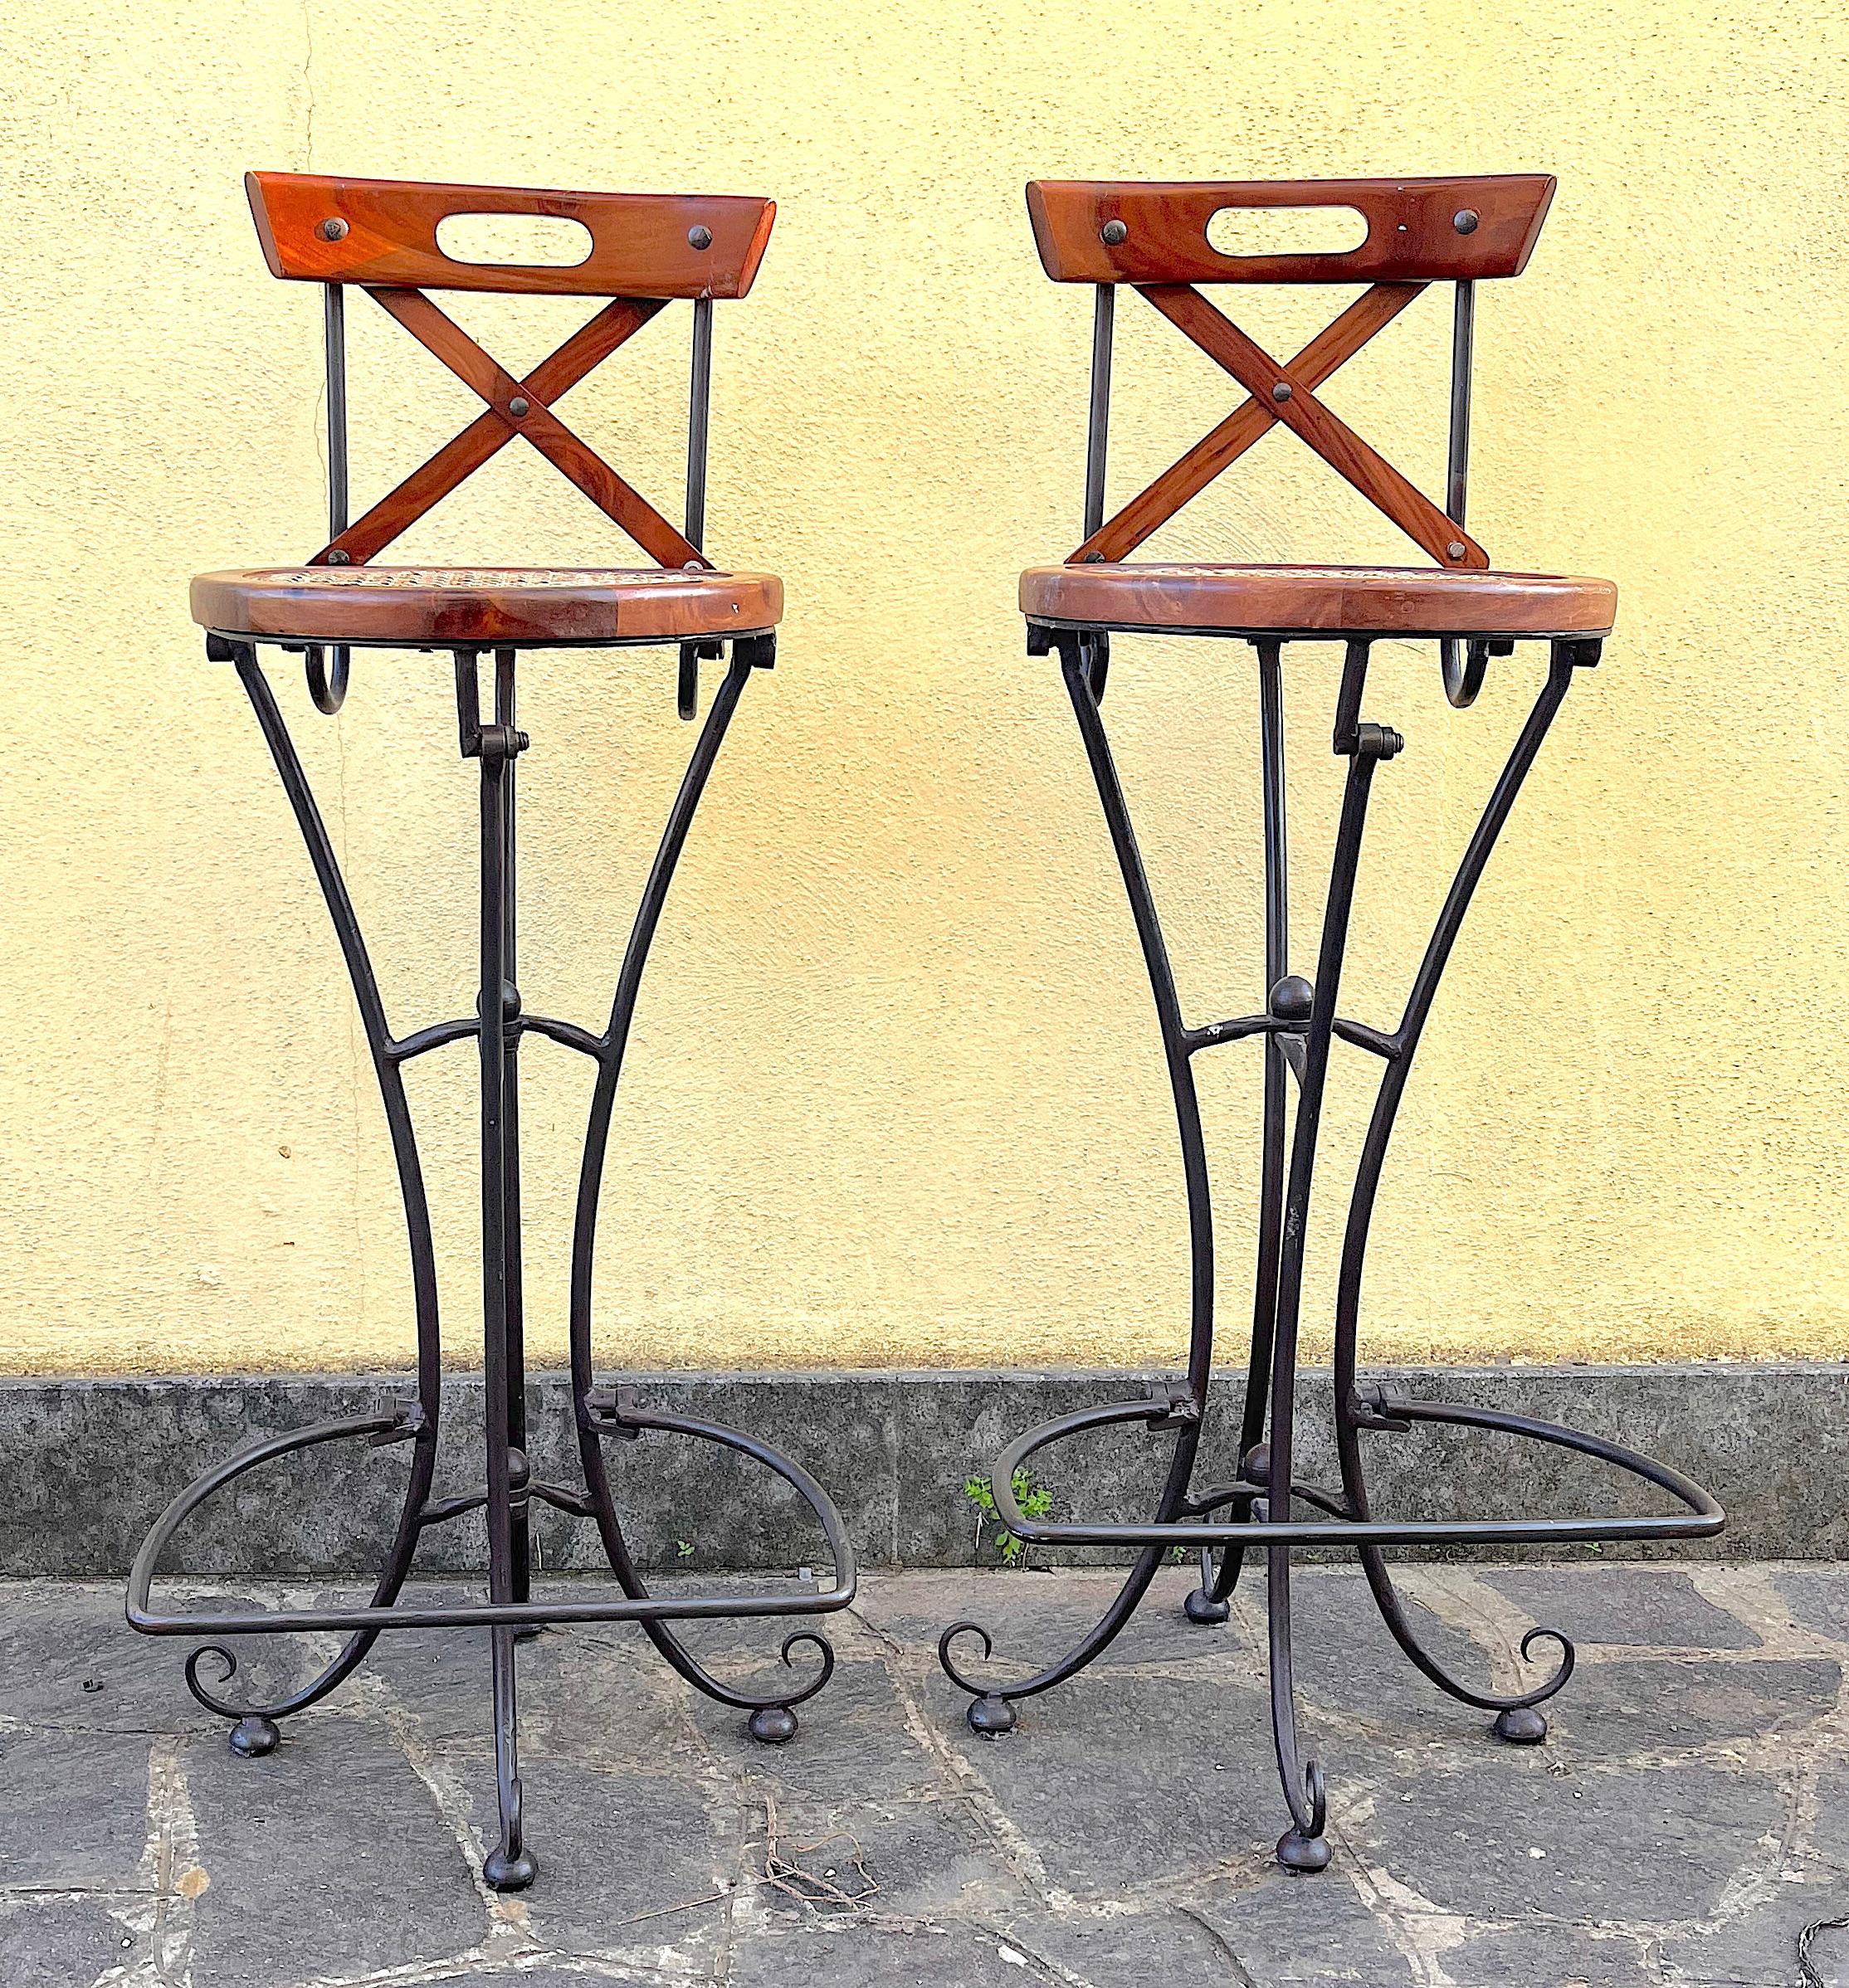 Iron stool with Vienna straw seat in good condition
Total height 102 cm
Seat 78 cm
Seat circumference 35 cm